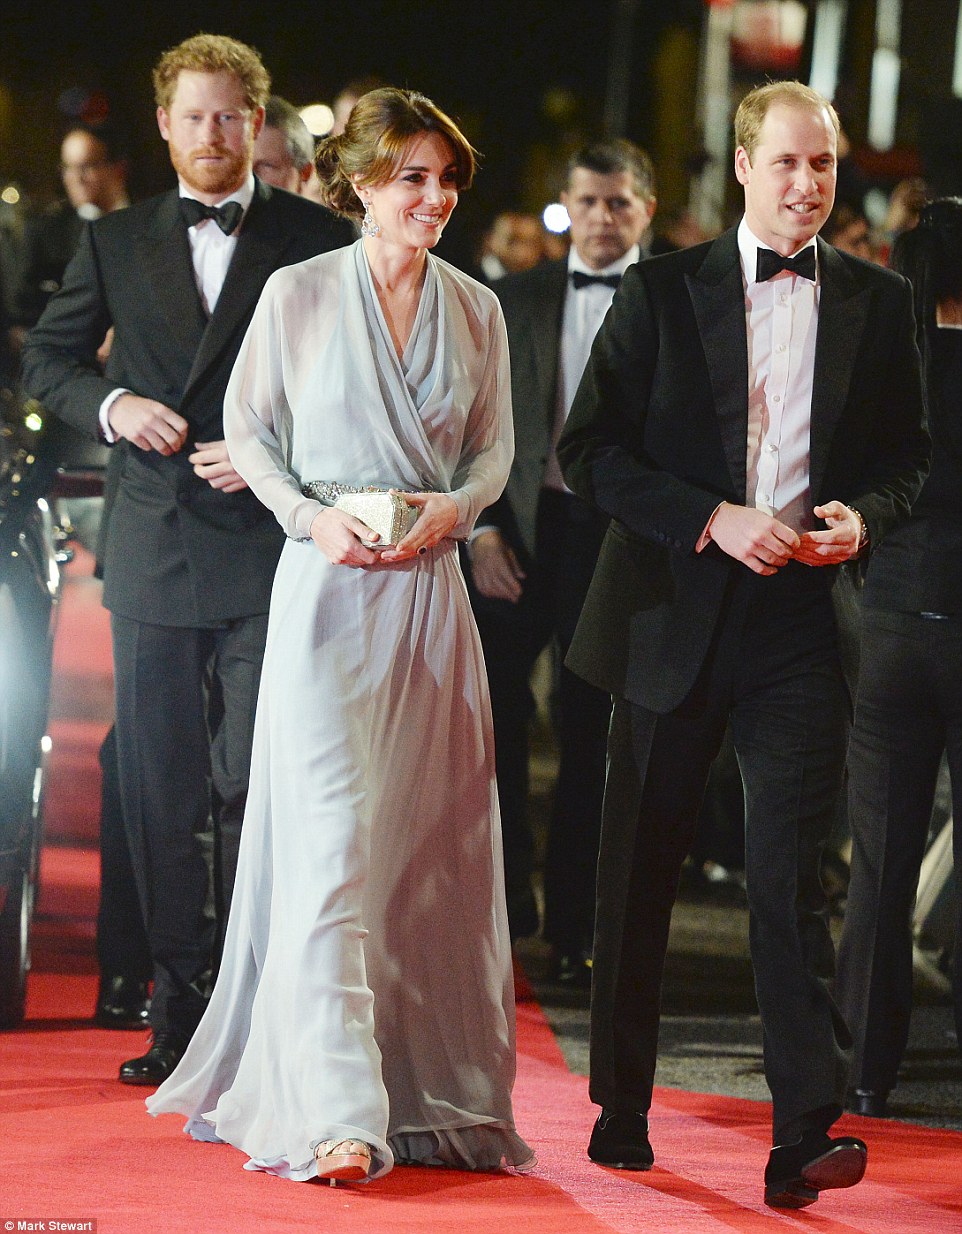 2DCFFB4500000578-3290524-The Duchess opted for a Jenny Packham gown for the occasion choo-a-16 1445894409581 d8fa5